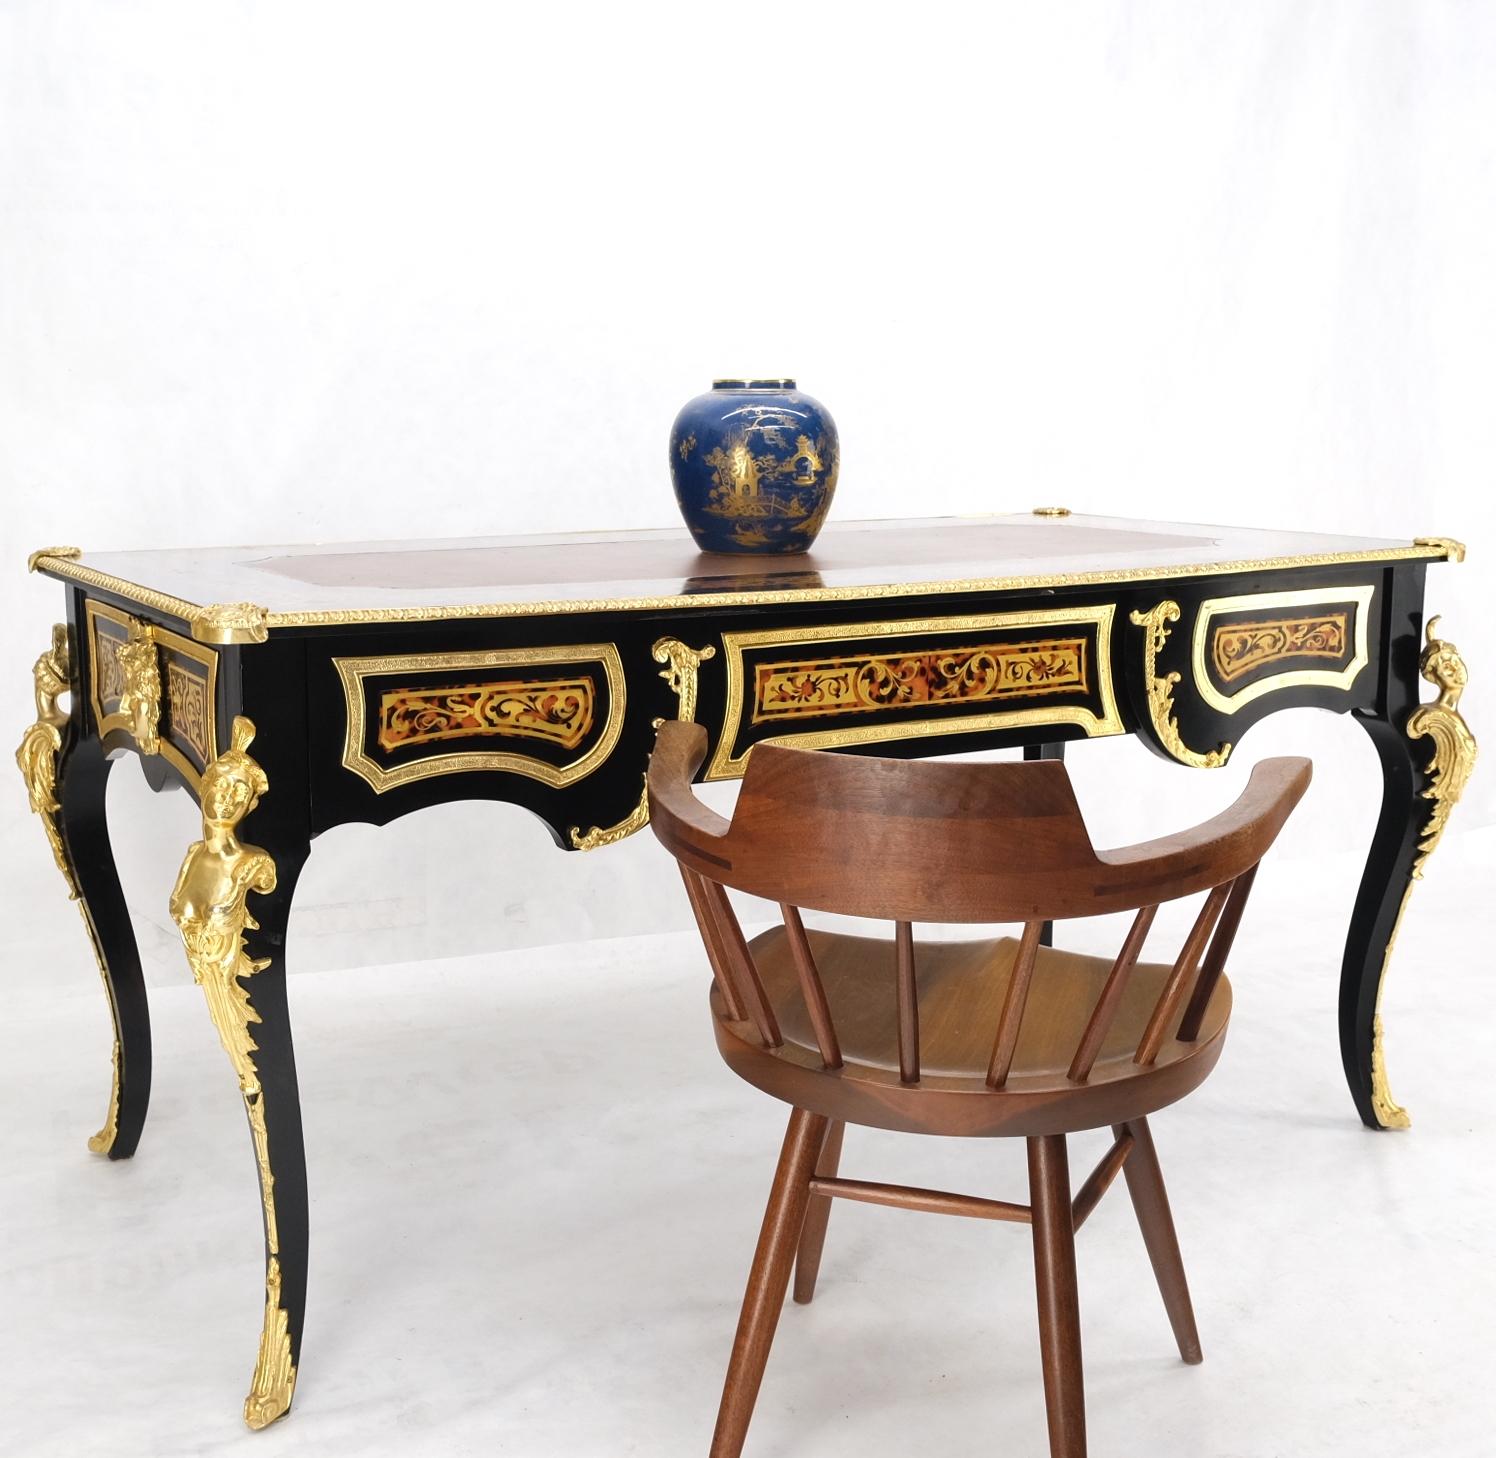 Enamel decorated French Louis Revival Ormolu mounted Bureau plat partner desk table console mint
 Both sides symmetrical, yet one side has ability to open.